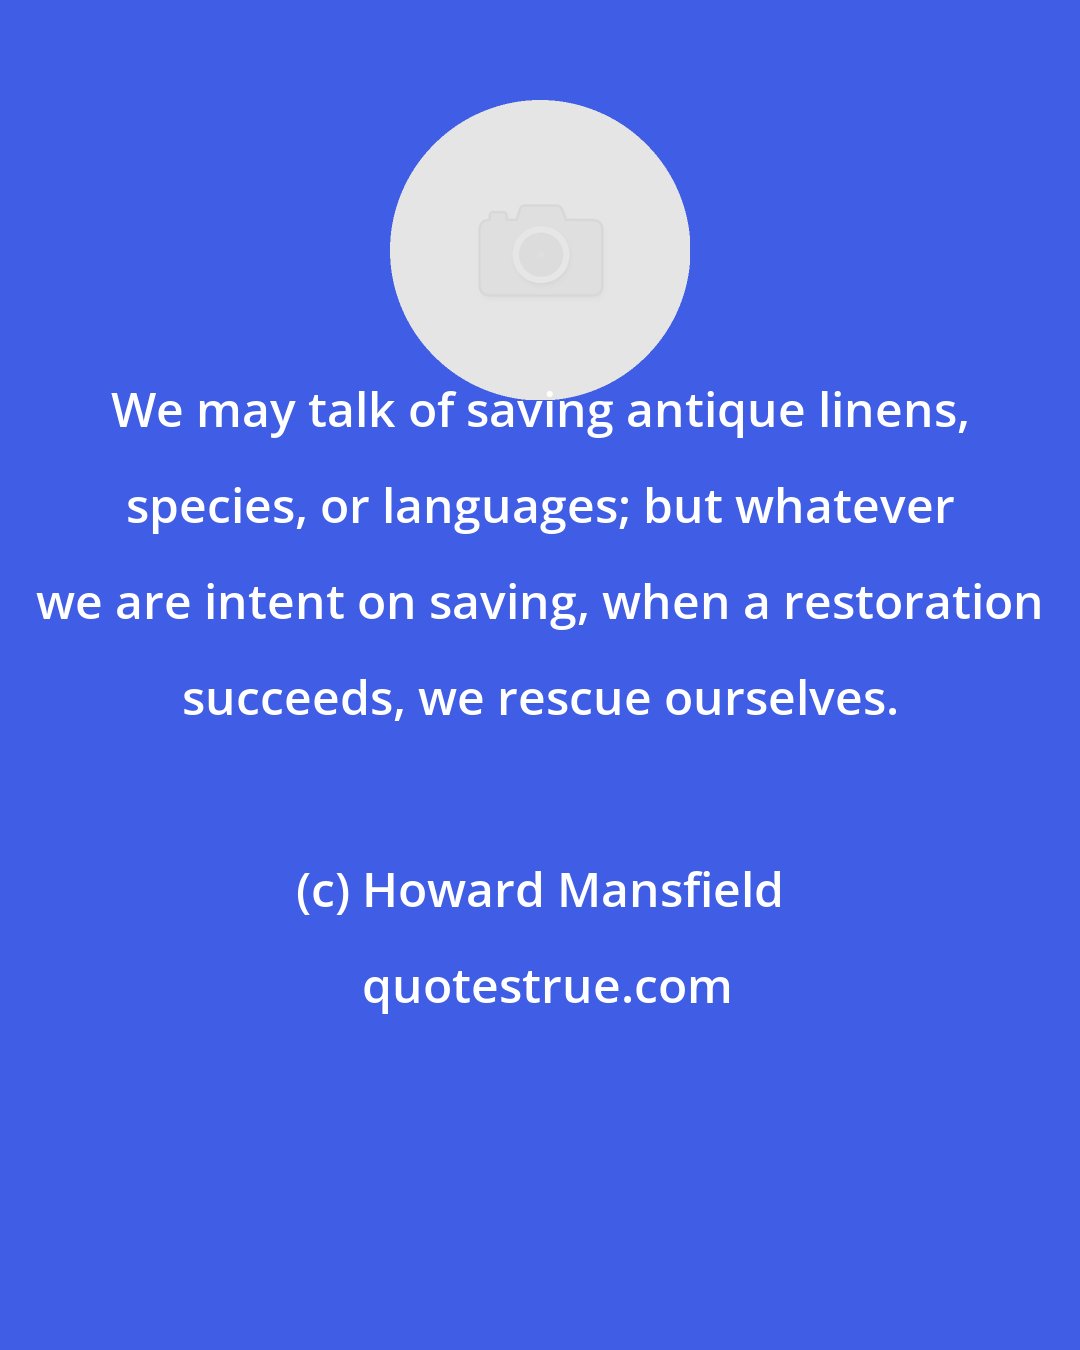 Howard Mansfield: We may talk of saving antique linens, species, or languages; but whatever we are intent on saving, when a restoration succeeds, we rescue ourselves.